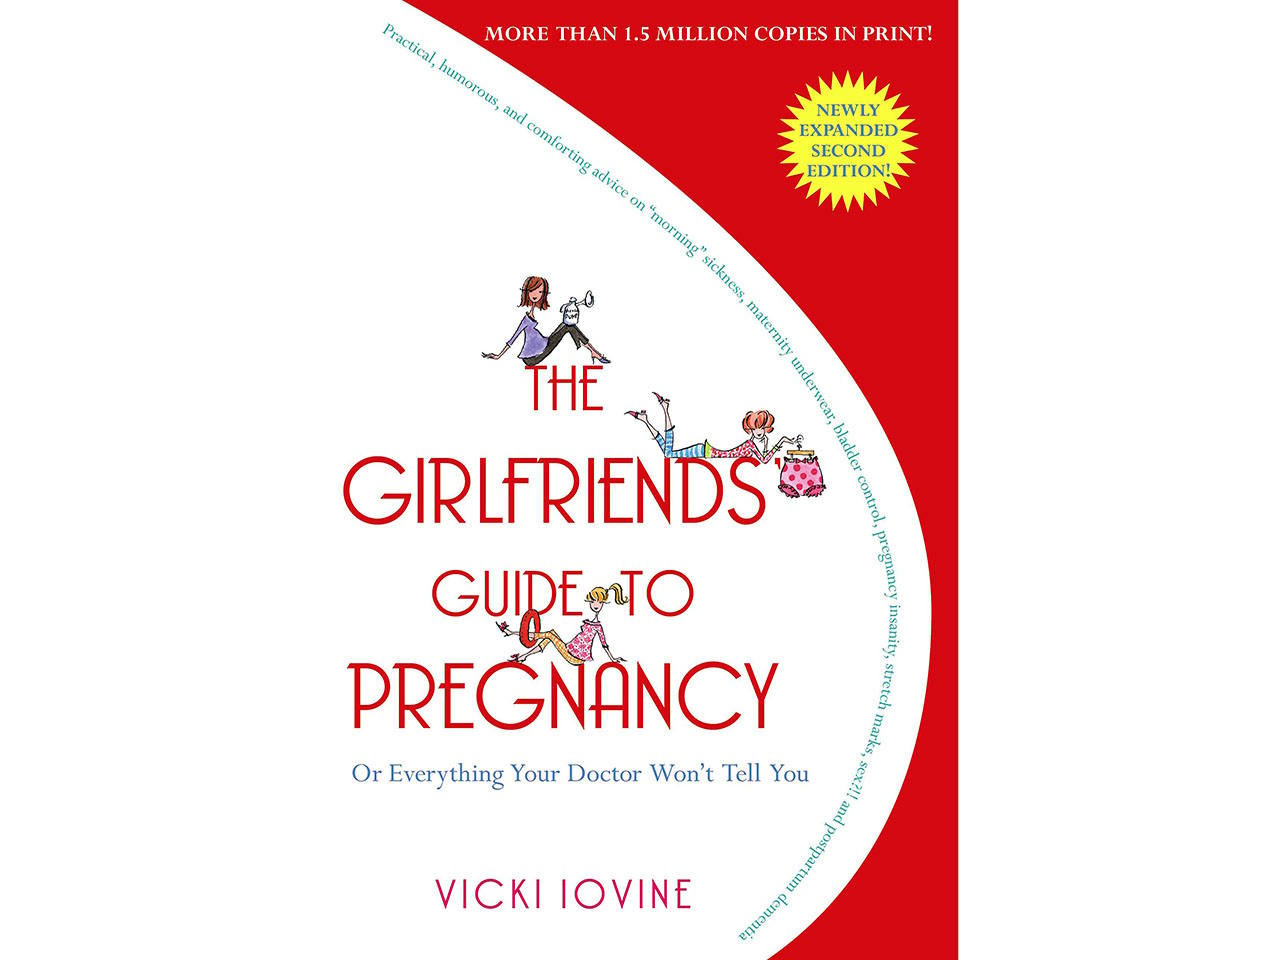 The cover of the pregnancy book The Girlfriend